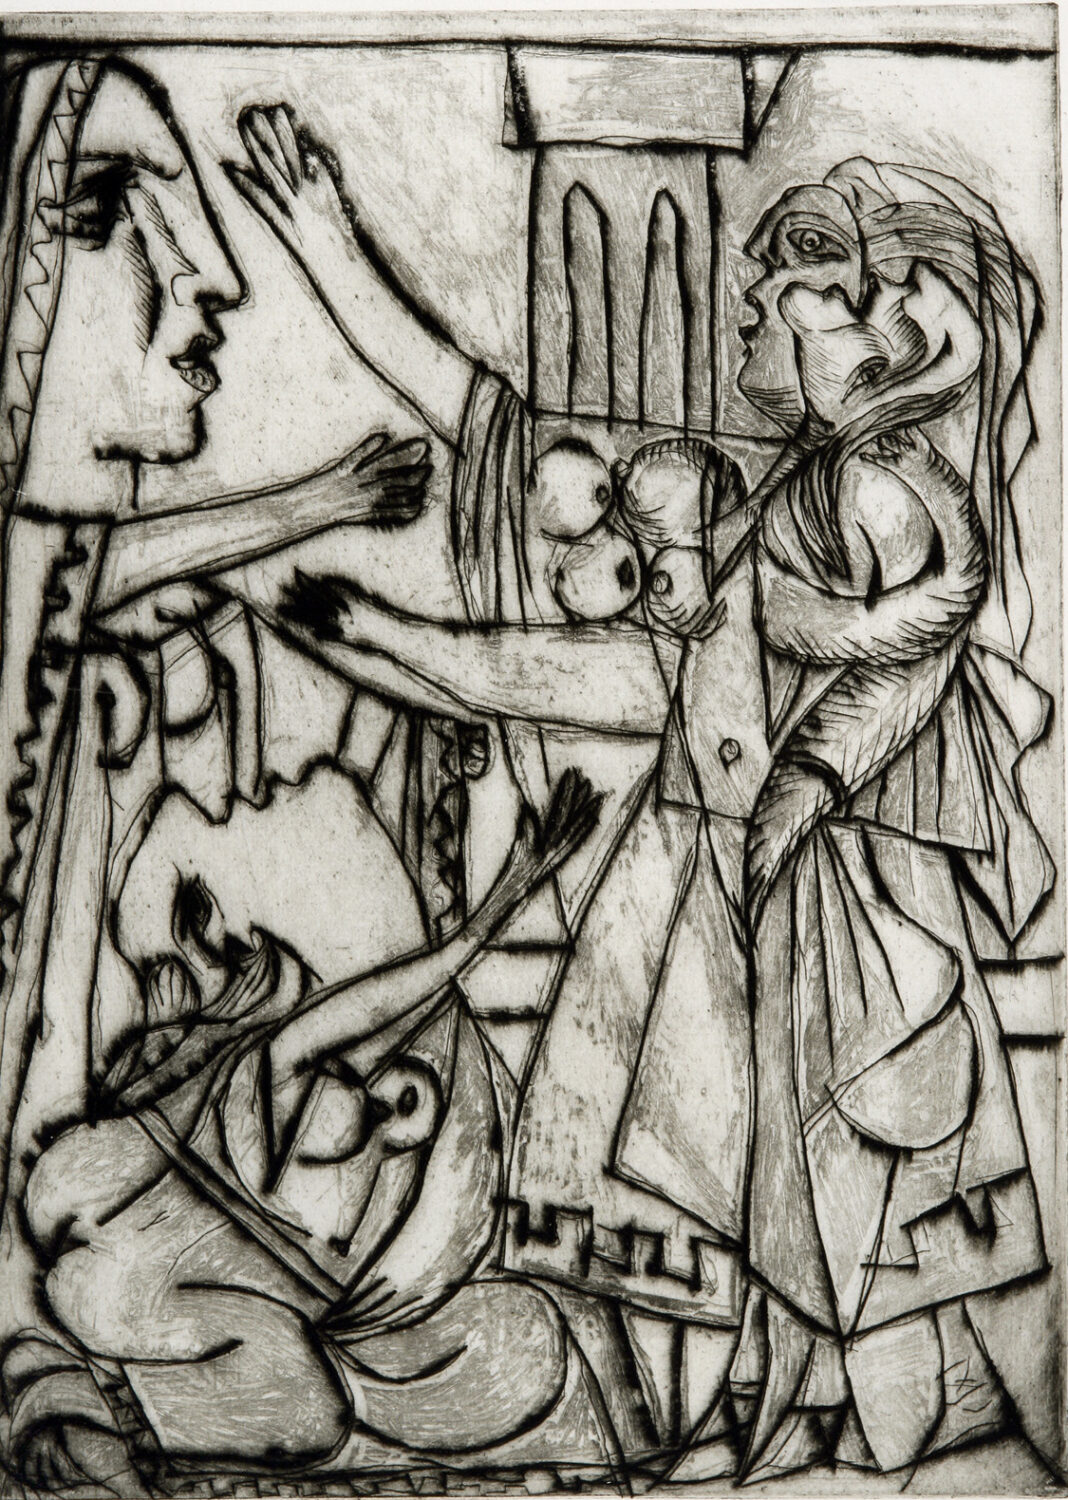 thumbnail of Aquatint, Engraving and Drypoint by Pablo Picasso titled Lysistrata: La Plainte des Femmes.